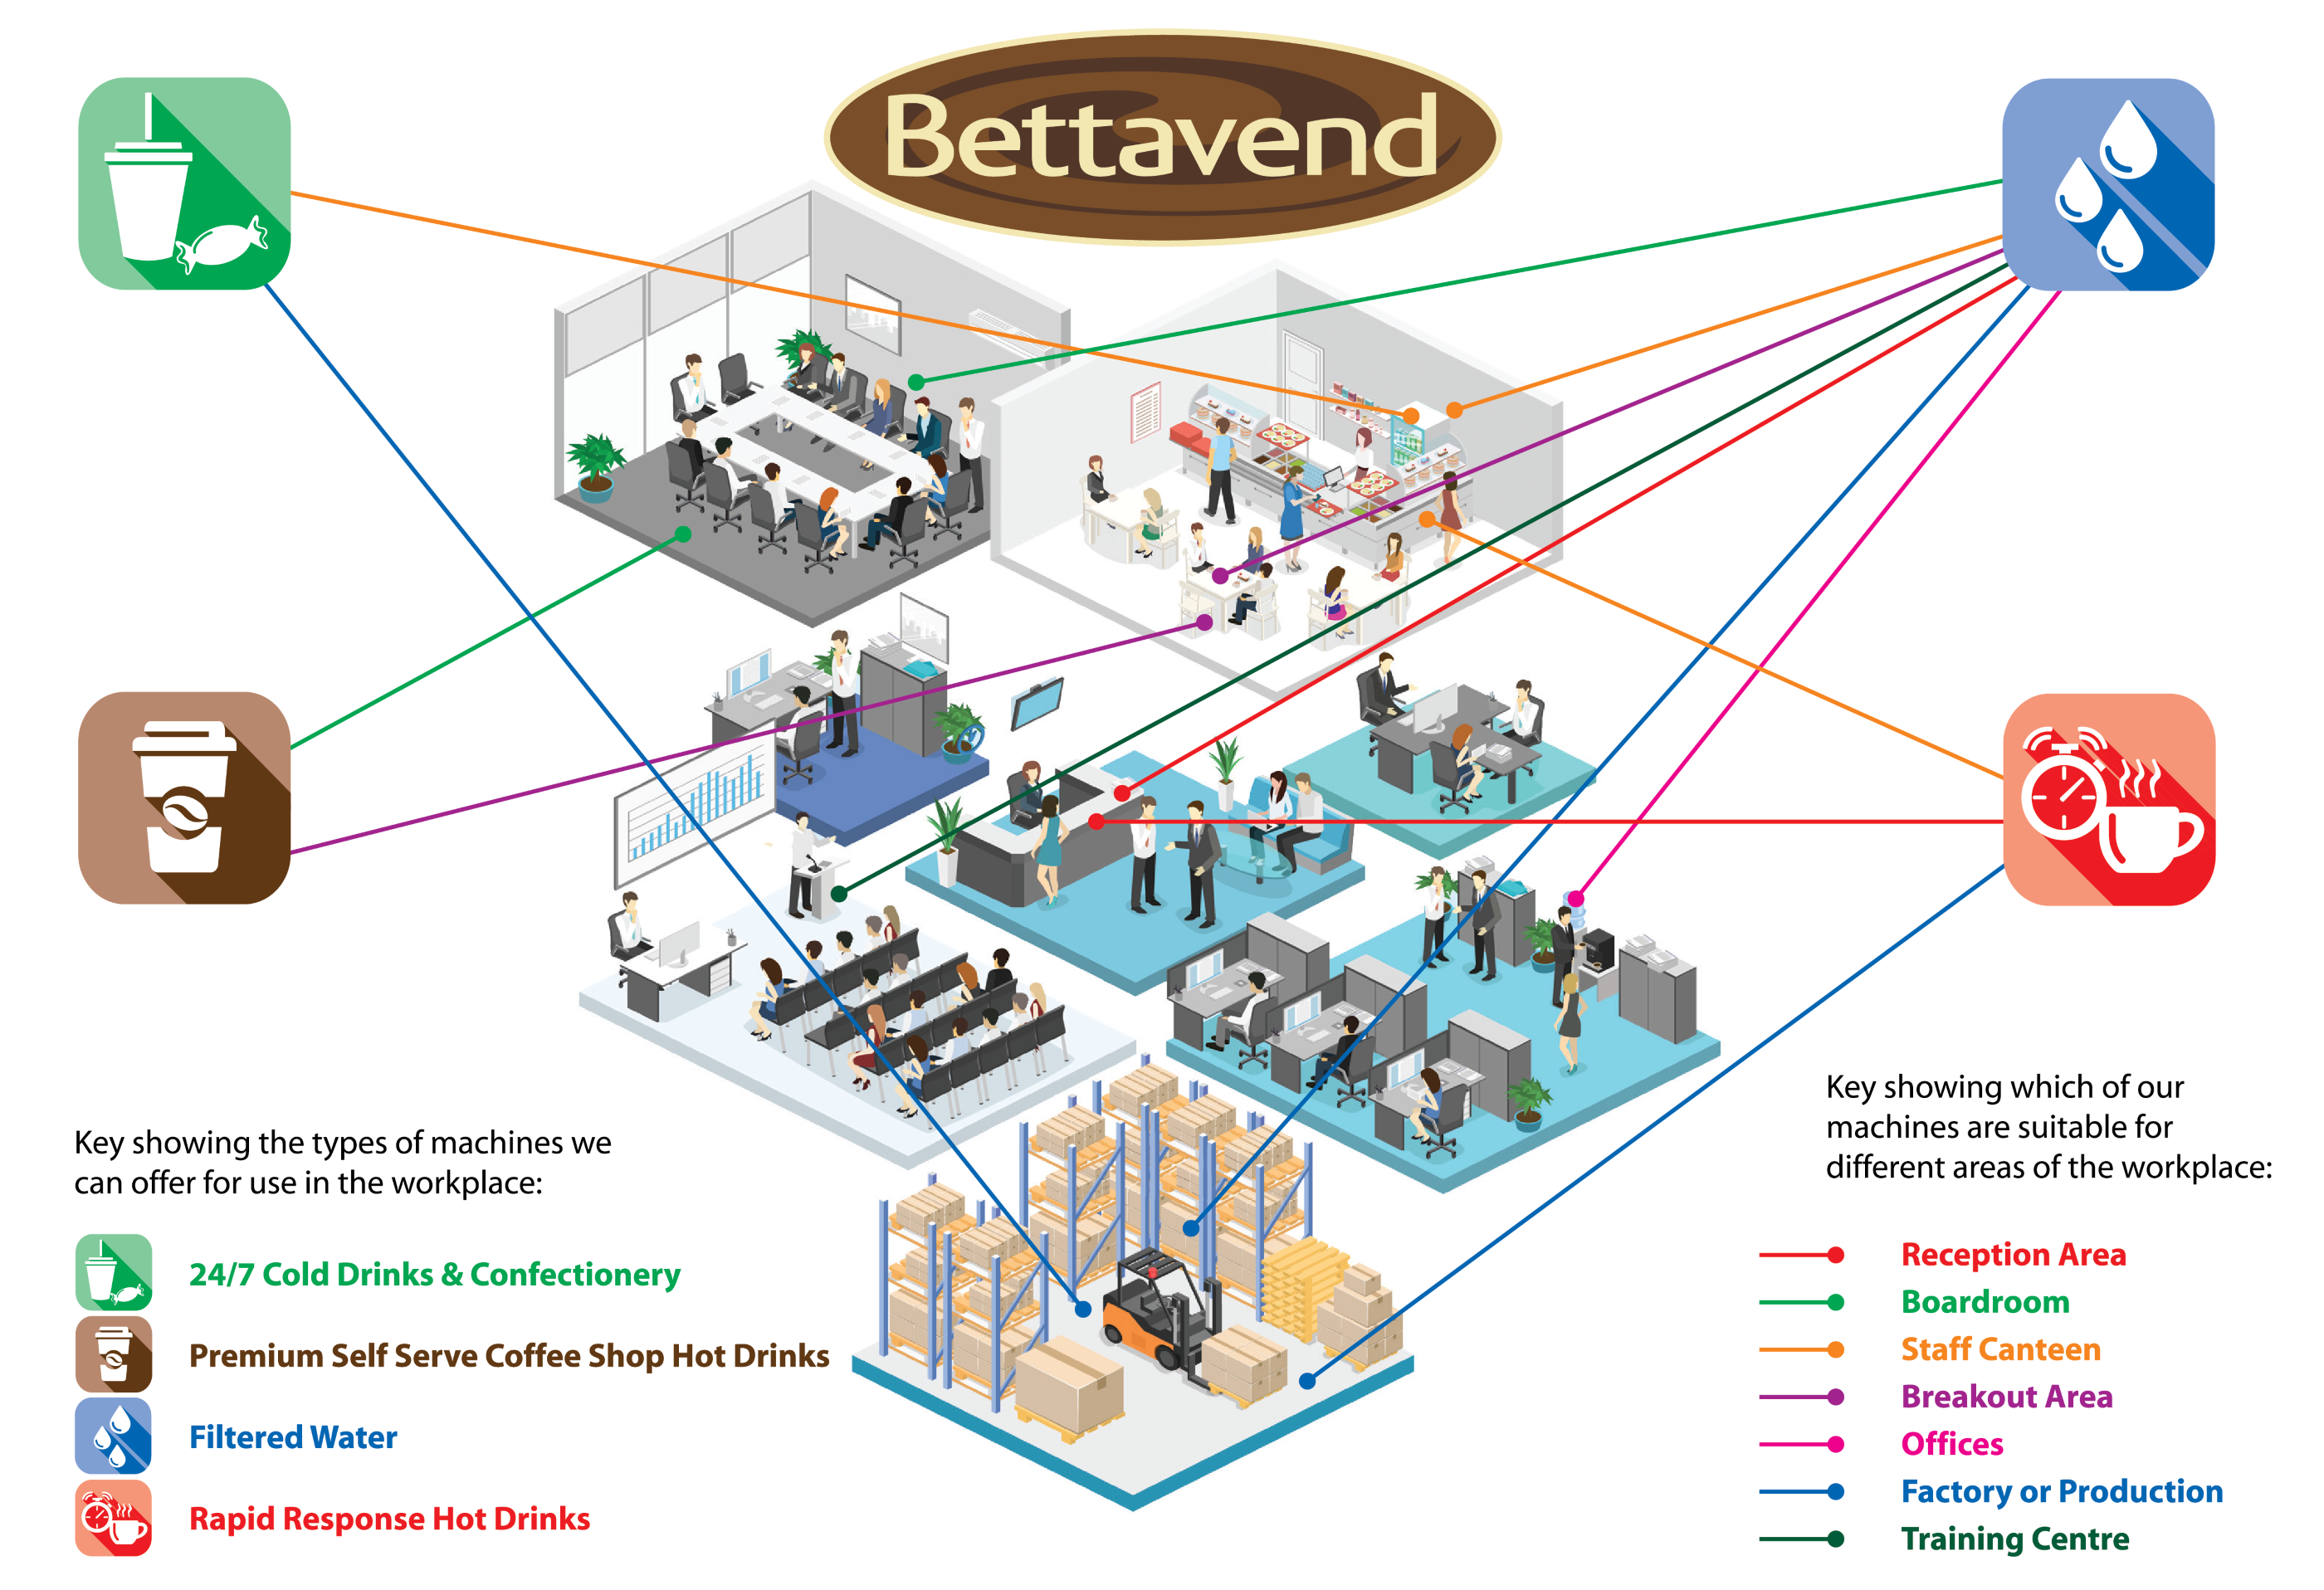 Bettavend tailored solutions